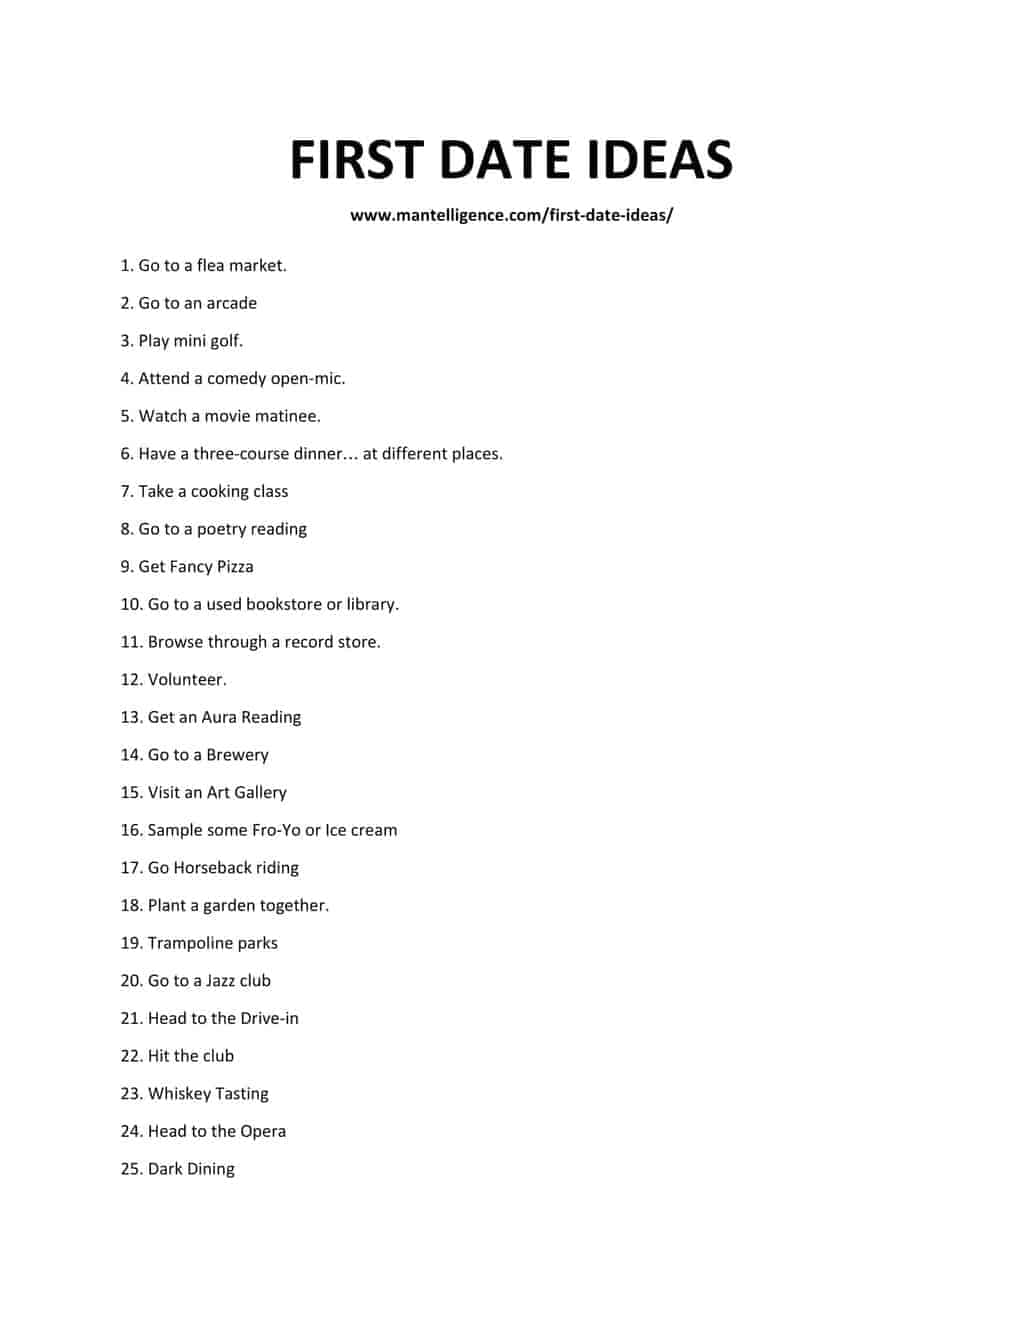 Downloadable list of first date ideas